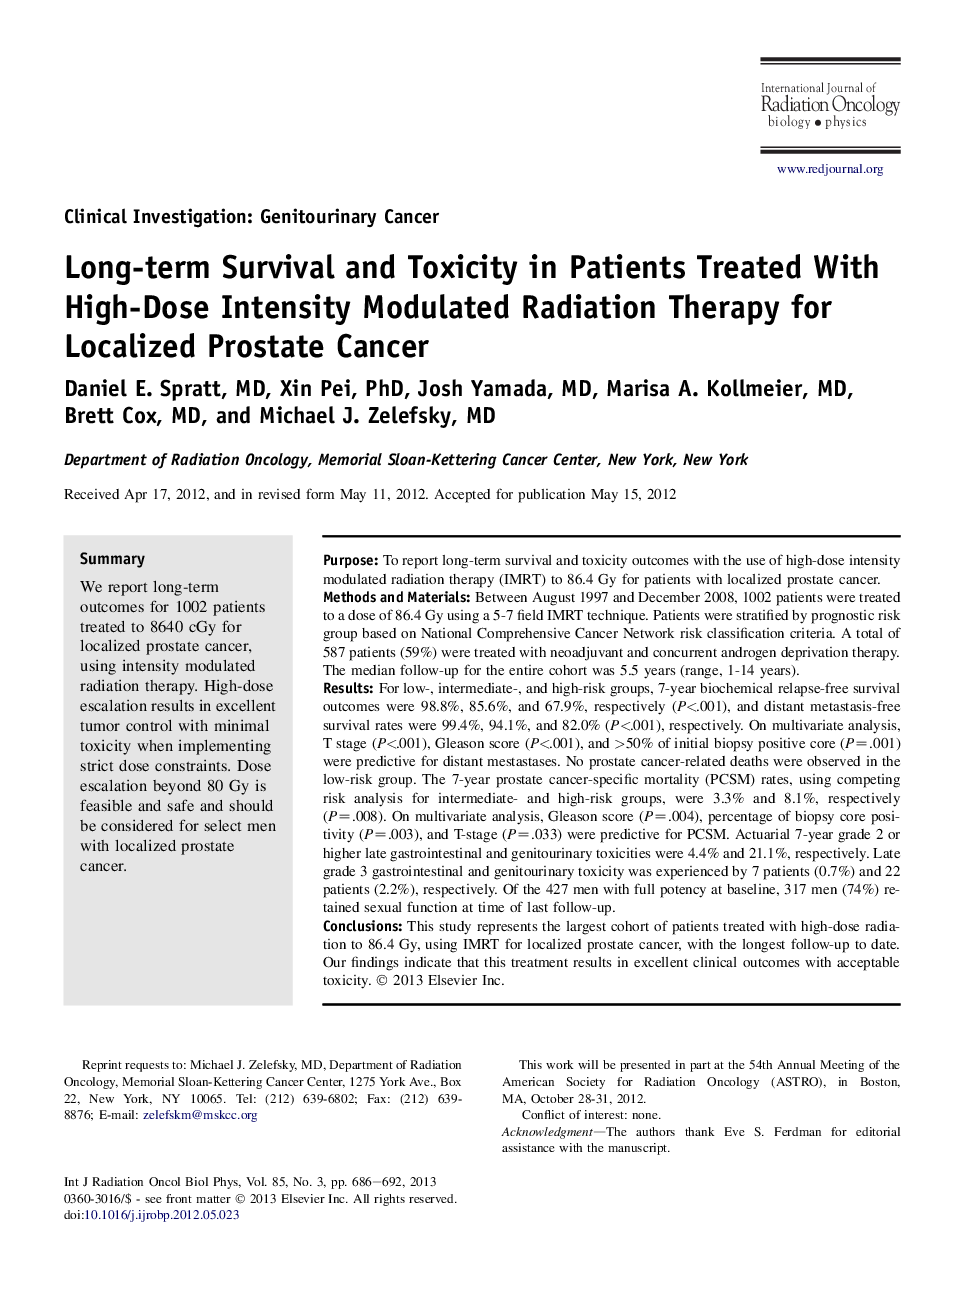 Long-term Survival and Toxicity in Patients Treated With High-Dose Intensity Modulated Radiation Therapy for Localized Prostate Cancer